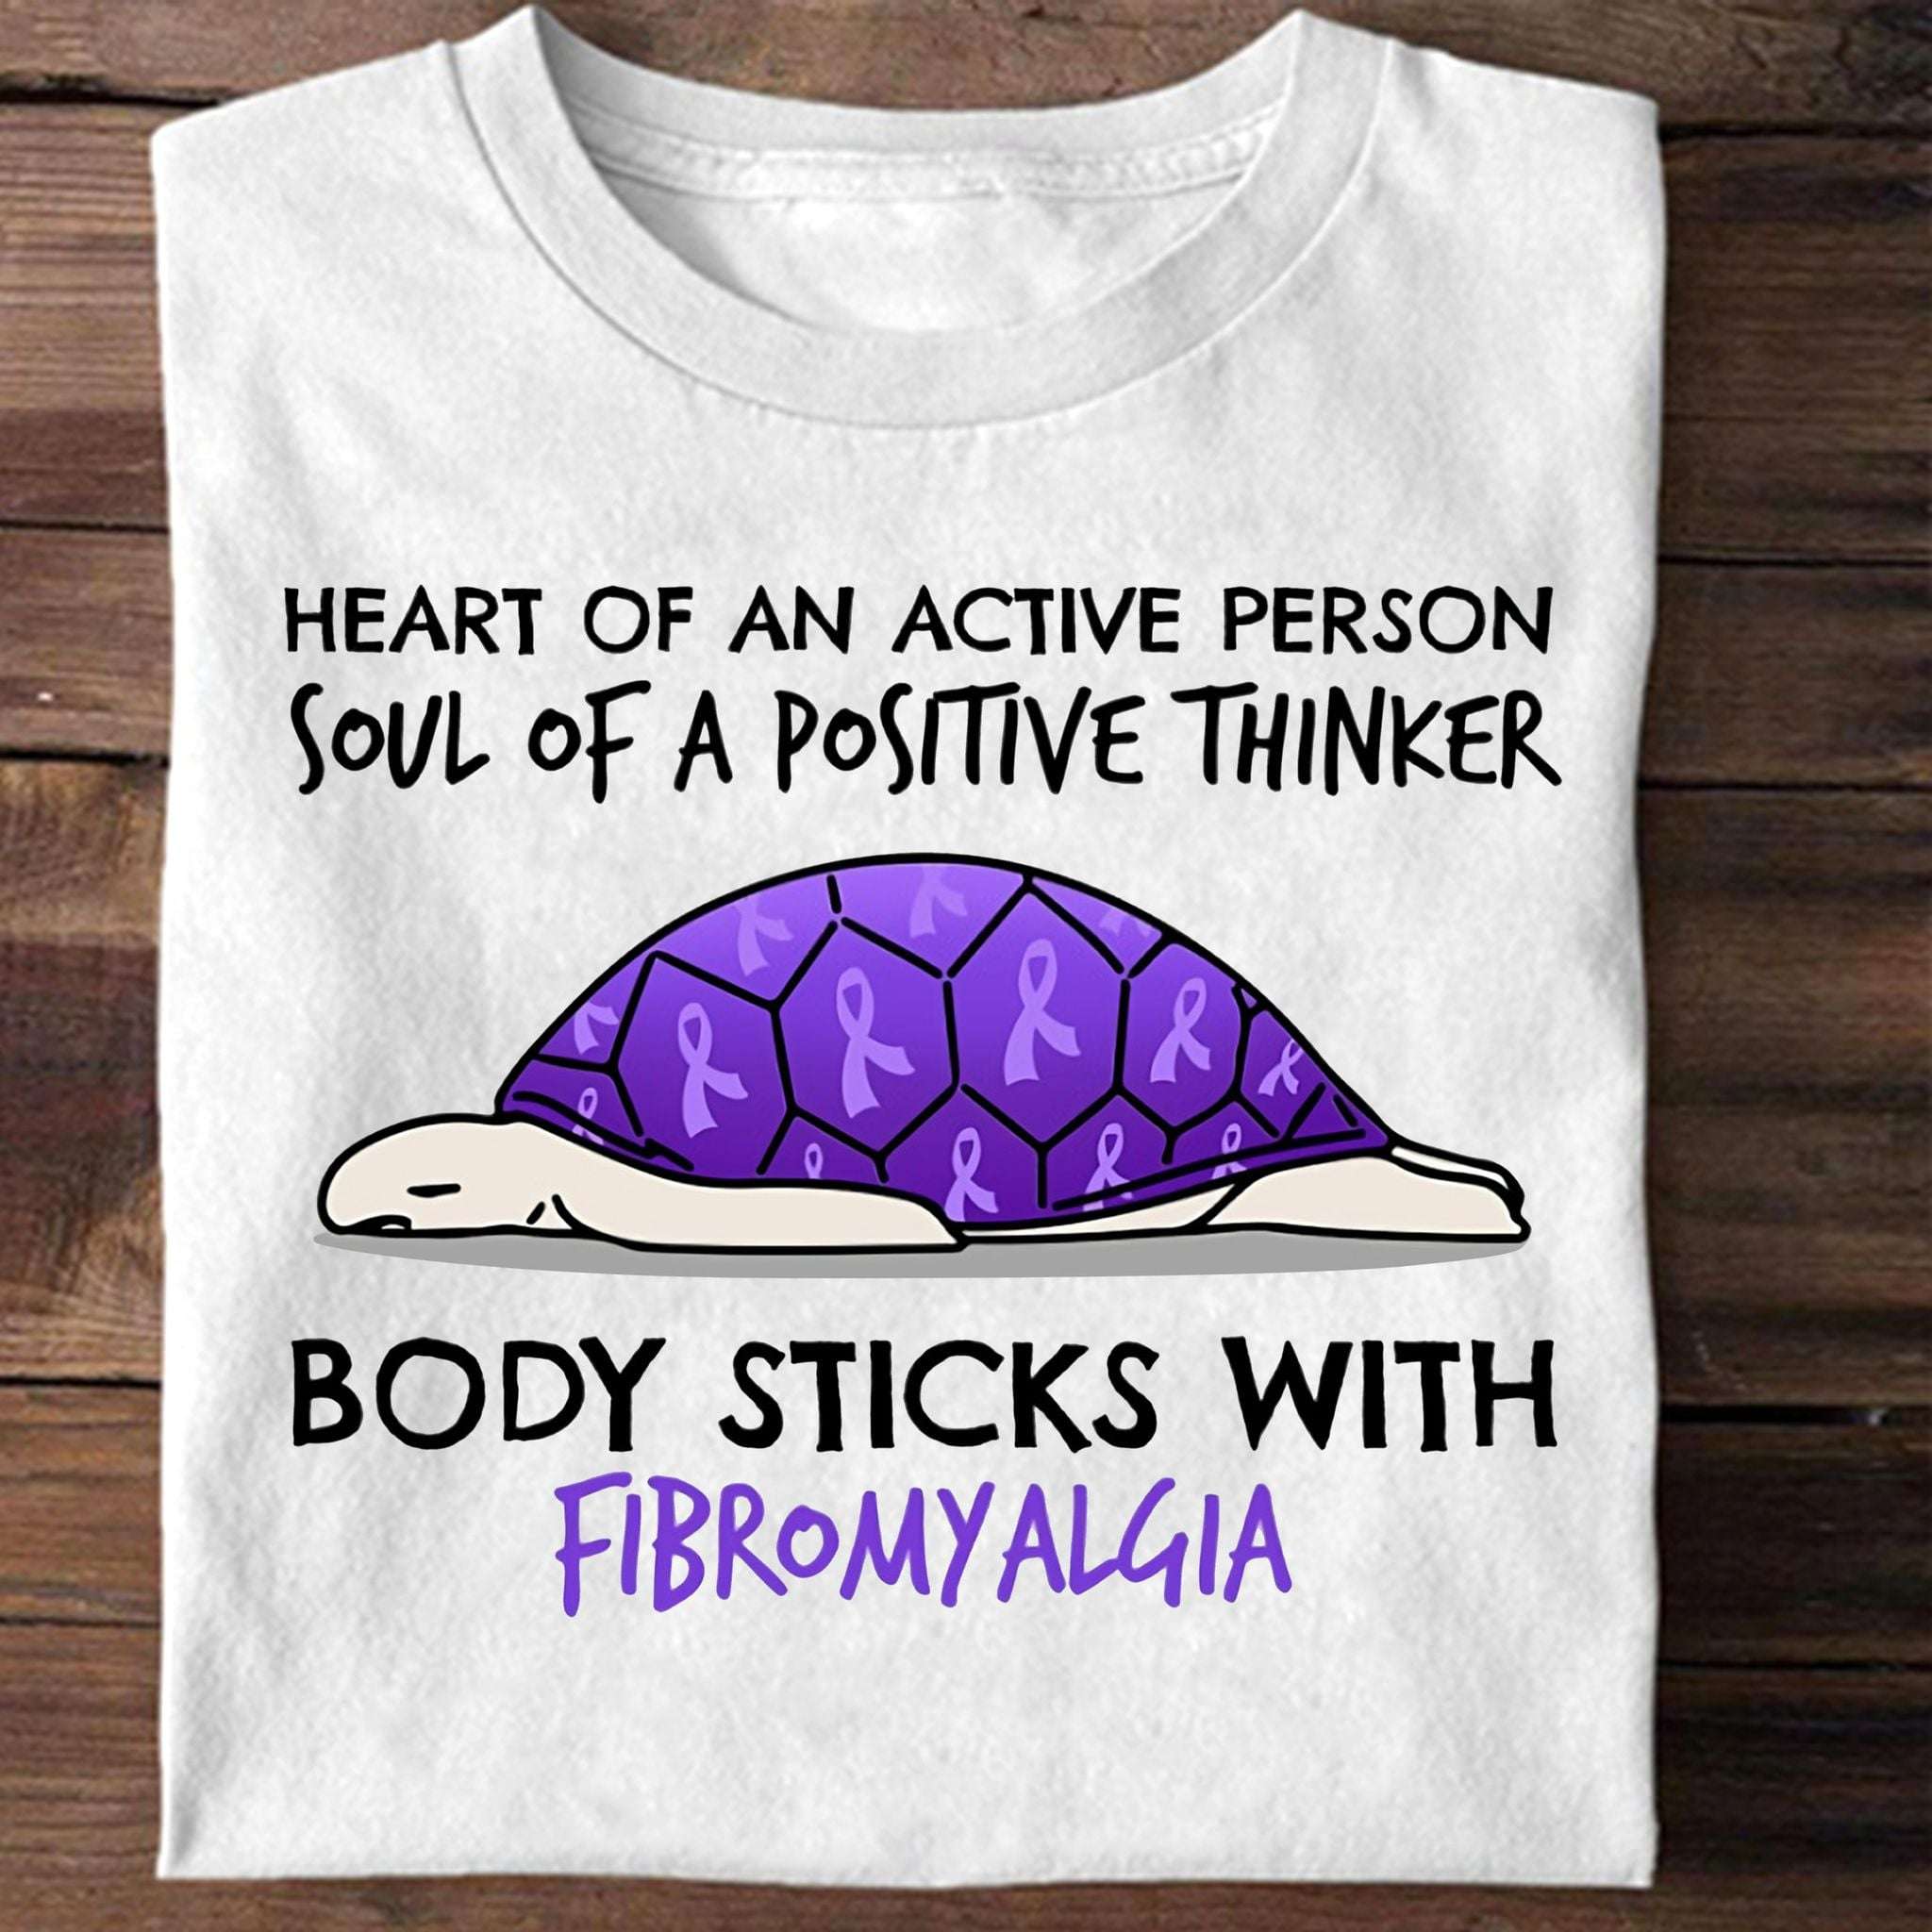 Fibromyalgia Turtle - Heart of an active person soul of a positive thinker body sticks with fibromyalgia